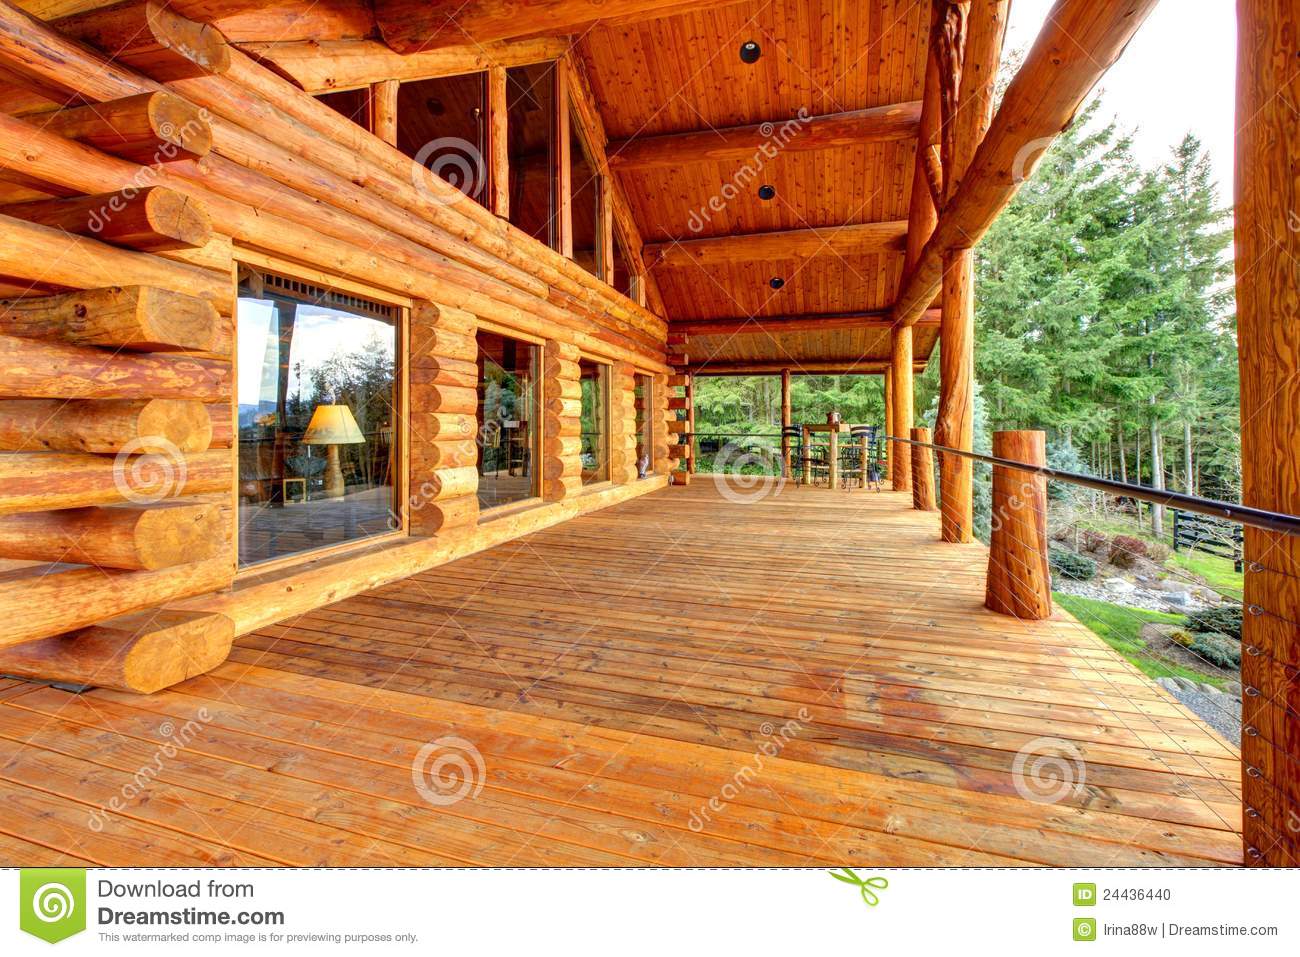 Wood Log Cabinet Porch With Entrance And Bench With Firelds View